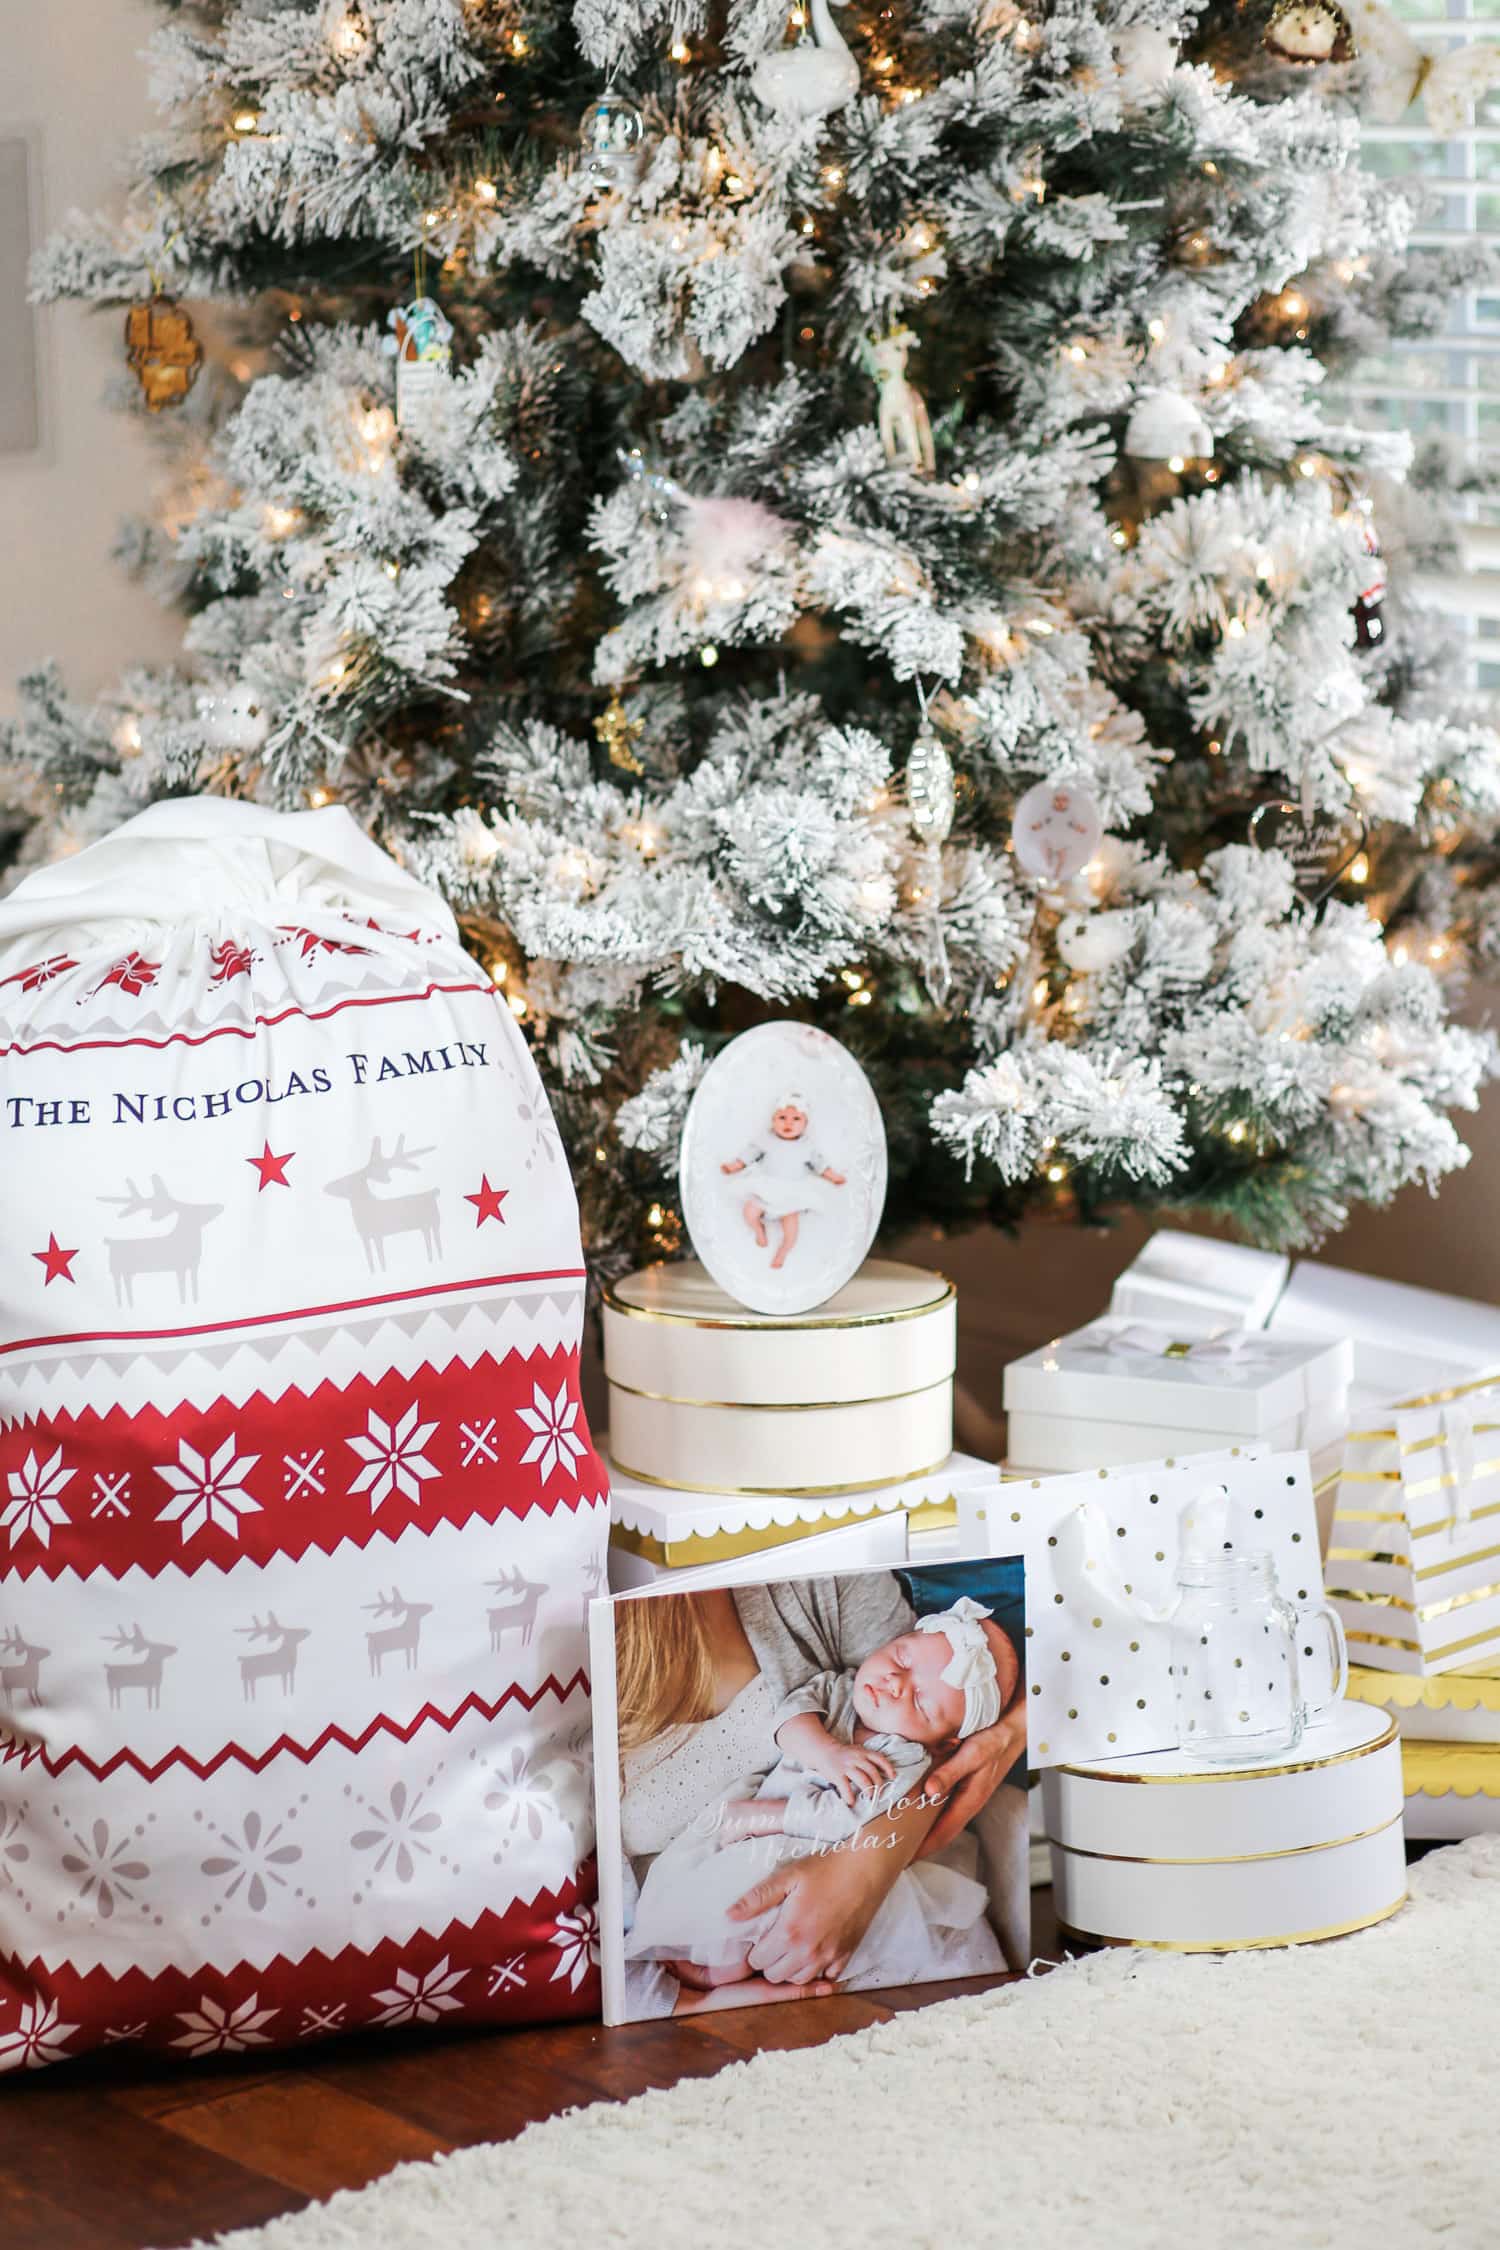 Personalized Christmas gifts | Baby's first Christmas | Newborn baby | Christmas gift Ideas | Christmas Ideas | Ashley Brooke Nicholas beauty blogger